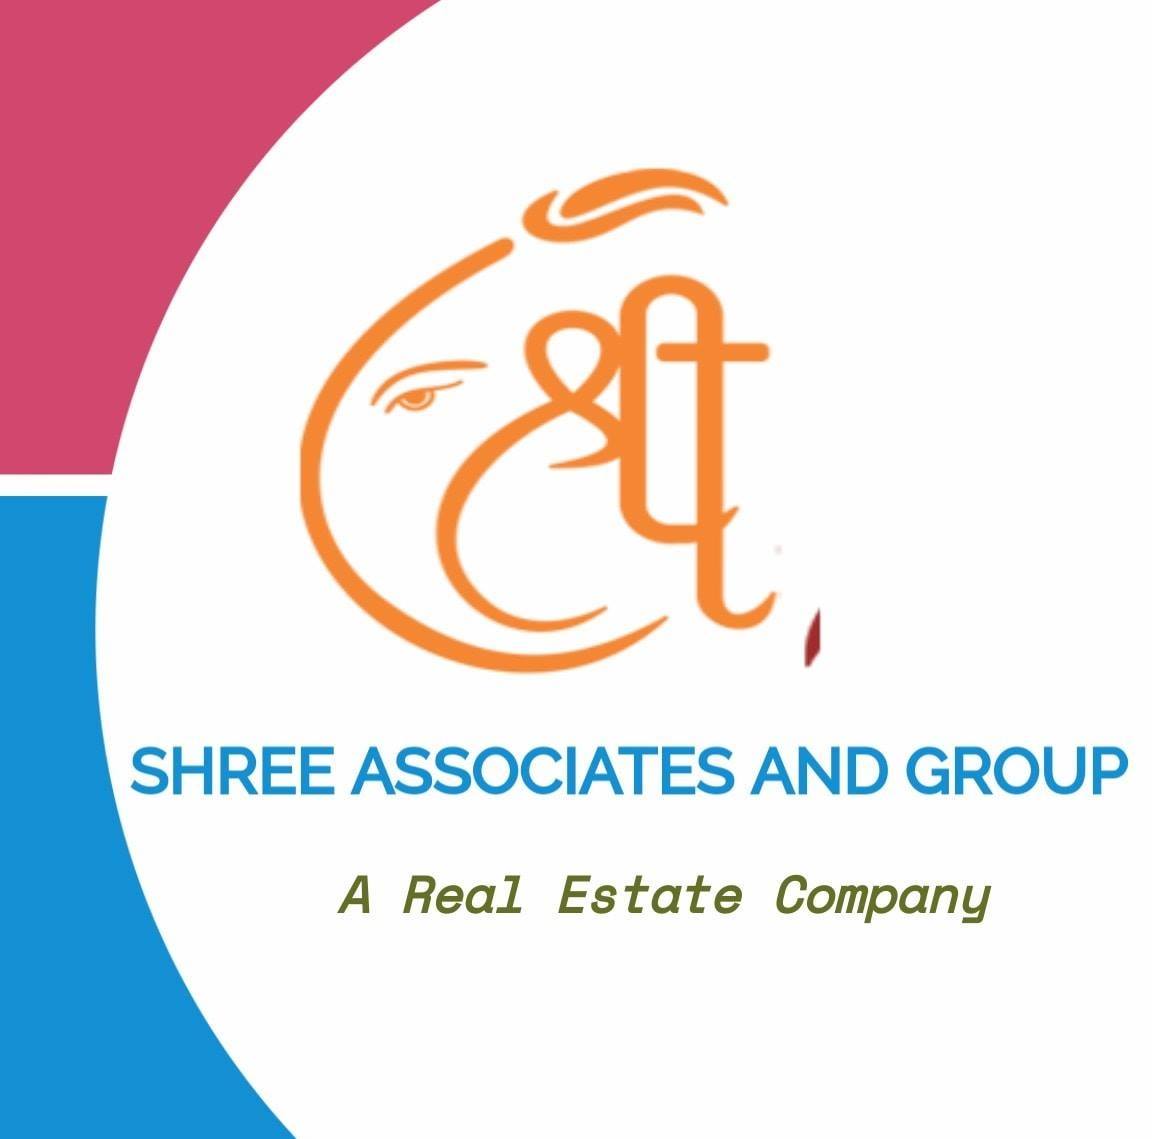 Shree Associates & Group|Accounting Services|Professional Services